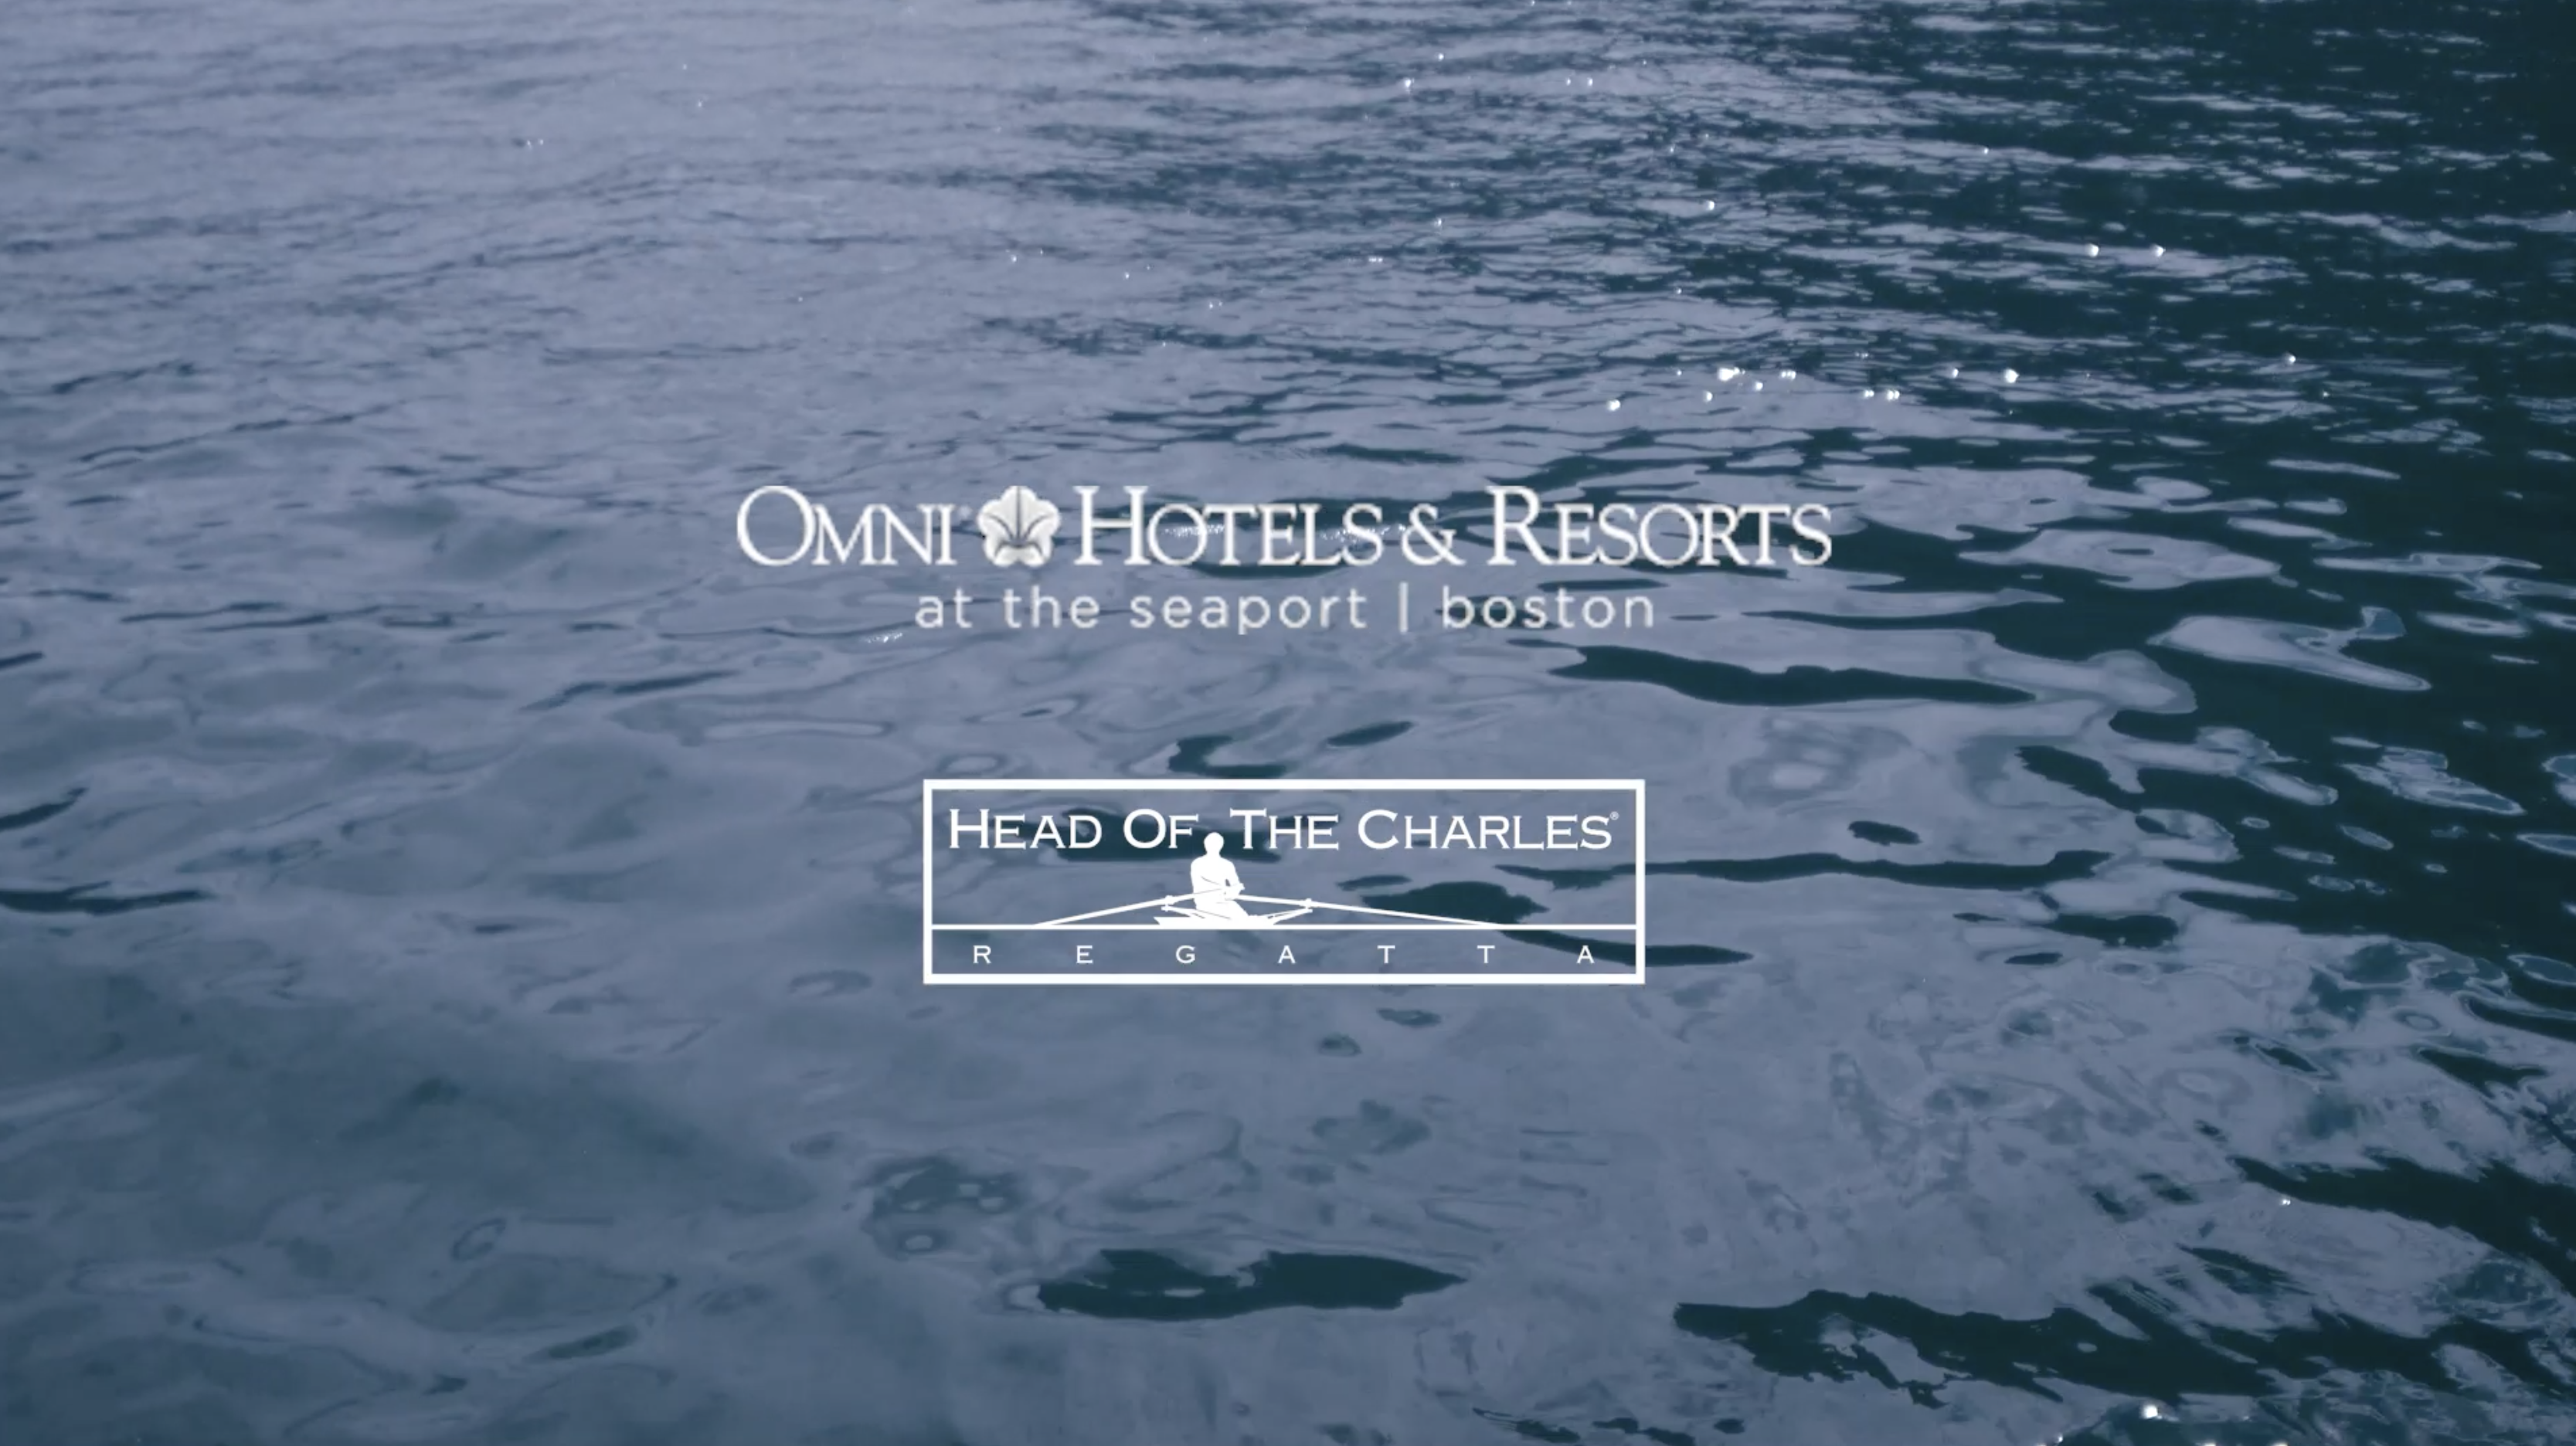 Video Highlight - Omni Boston Hotel at the Seaport | Fred Schoch and Mike Jorgensen 